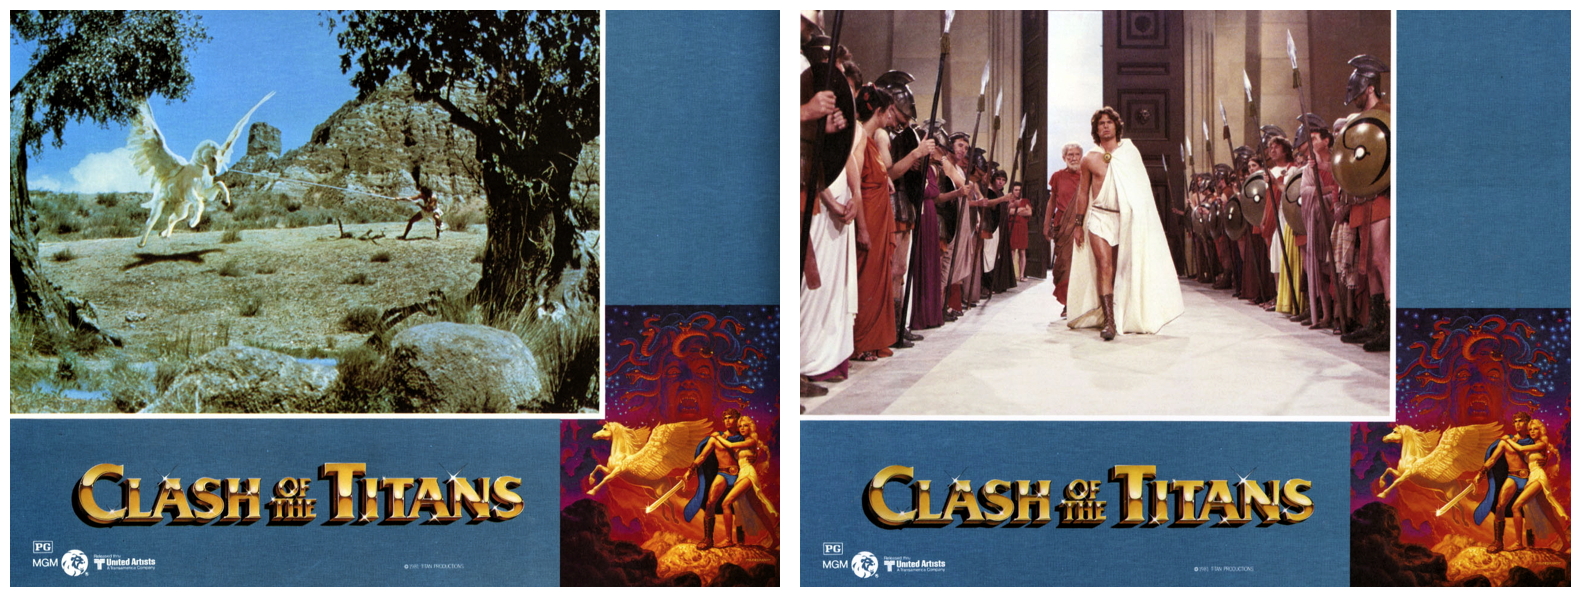 Clash Of The Titans lobby cards 1